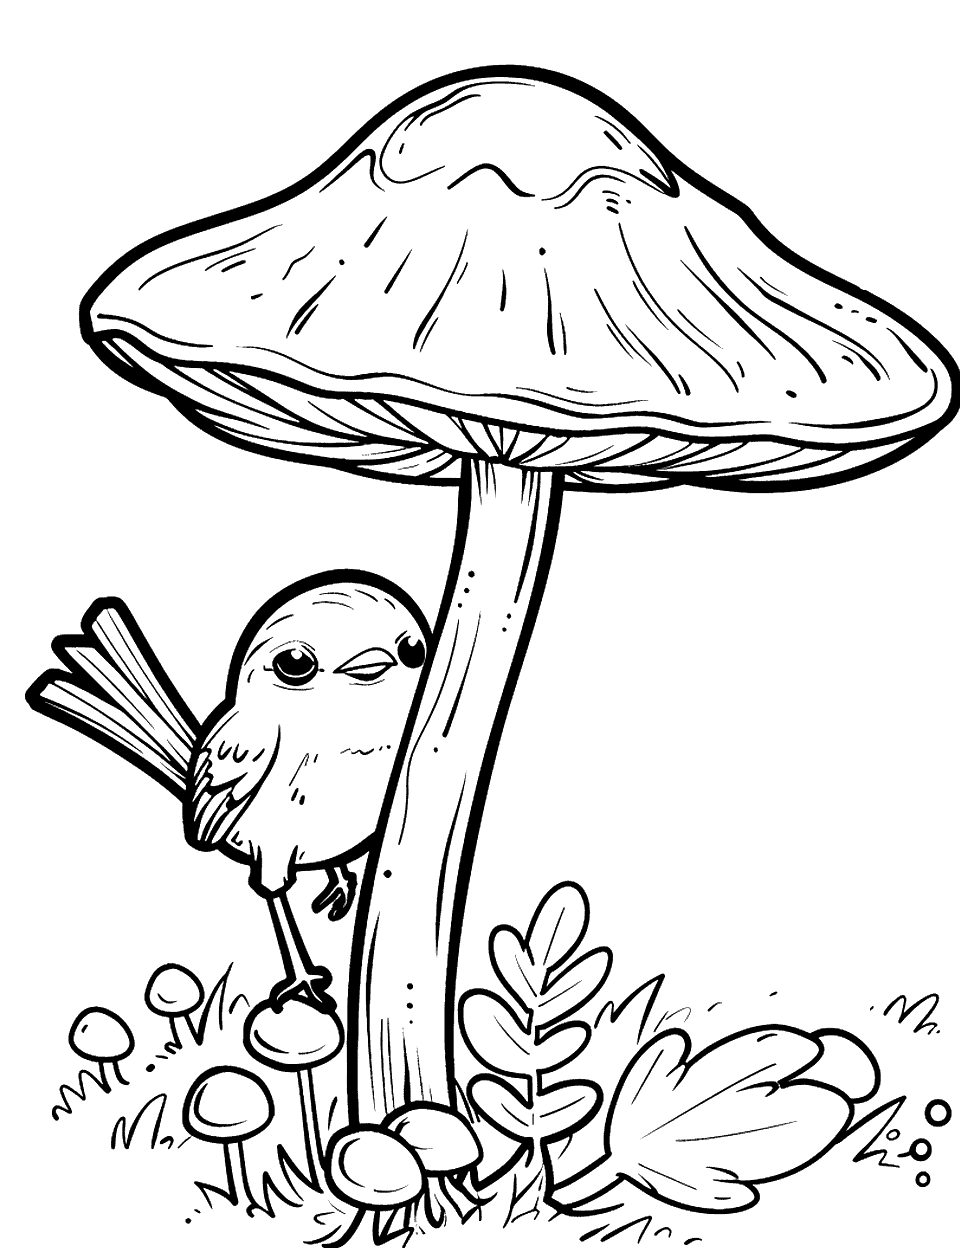 Bird Pecking at a Mushroom Coloring Page - A small bird pecking at a mushroom stock.